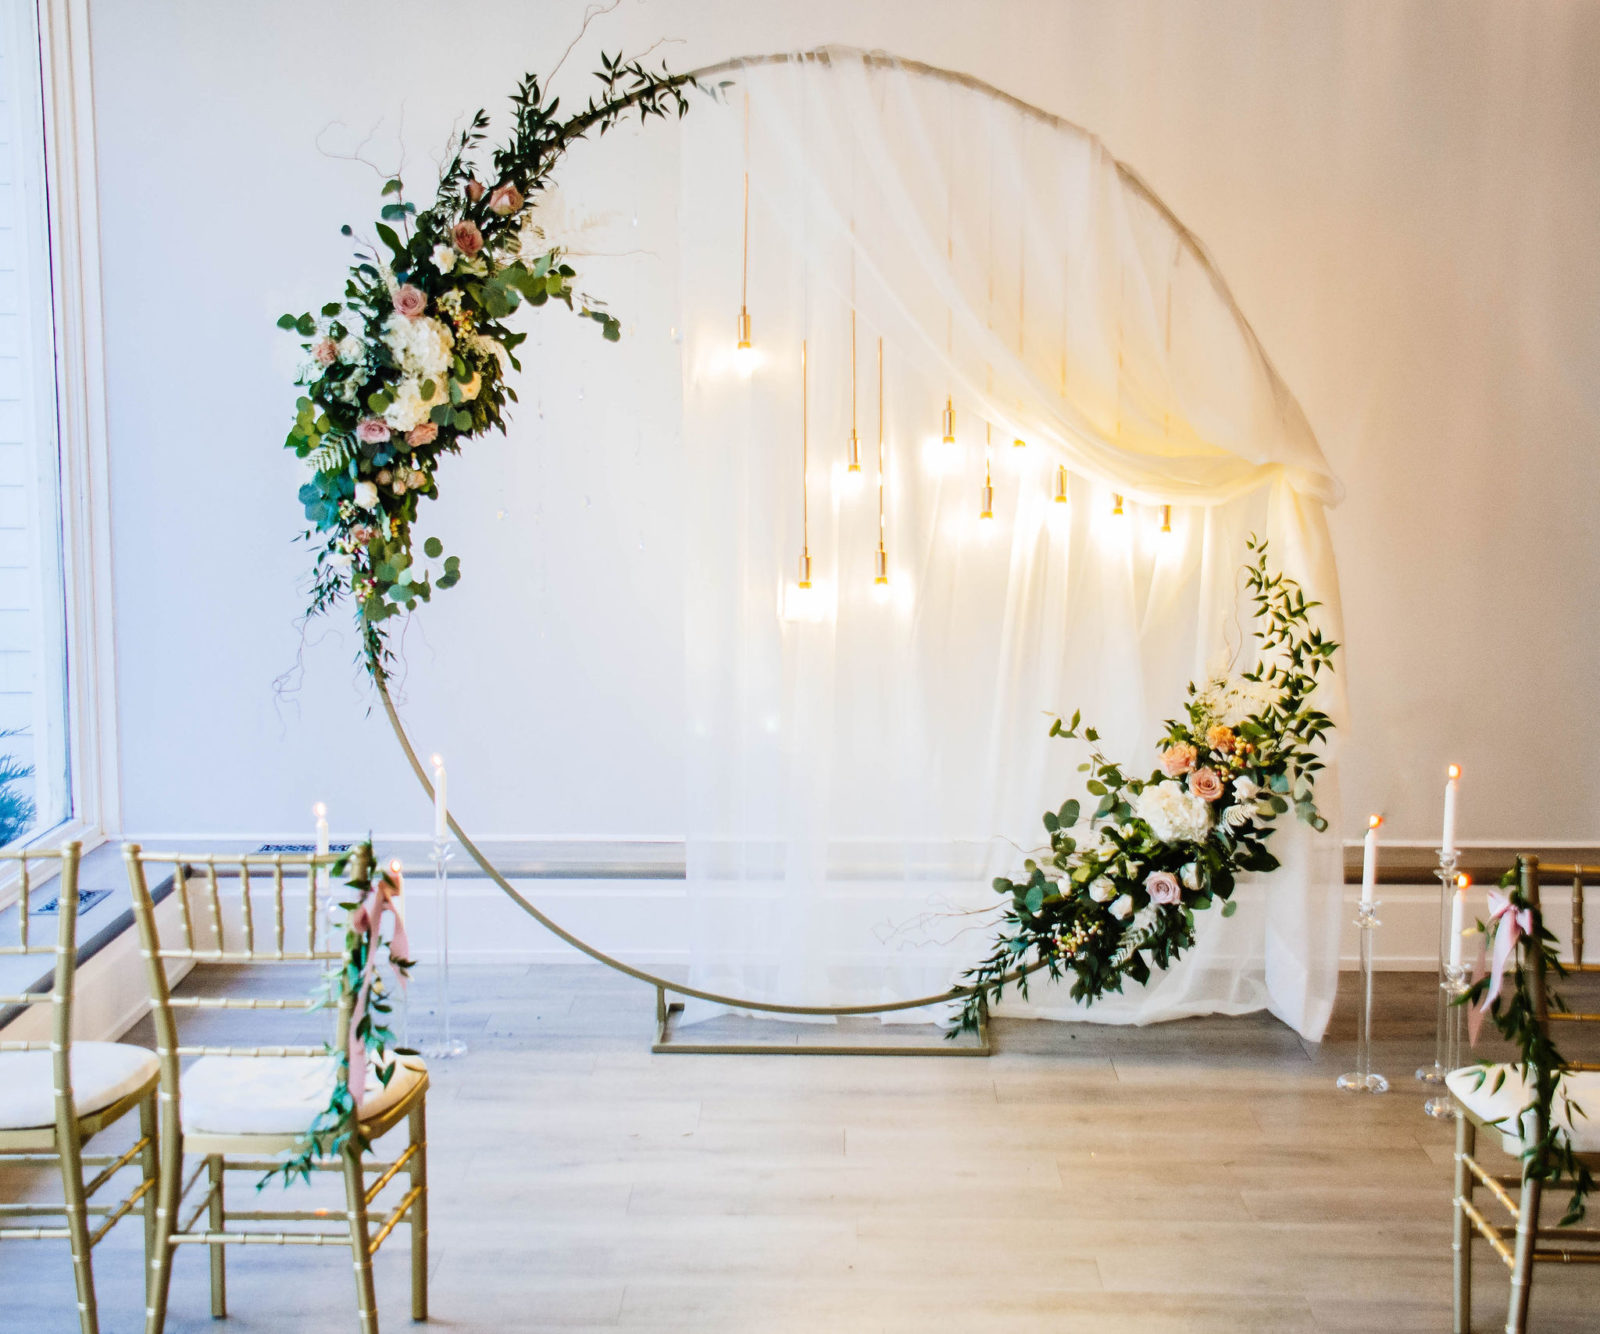 Enchanting ballroom wedding decor inspiration with a circular arch, lush greenery, hanging lights and golden chairs